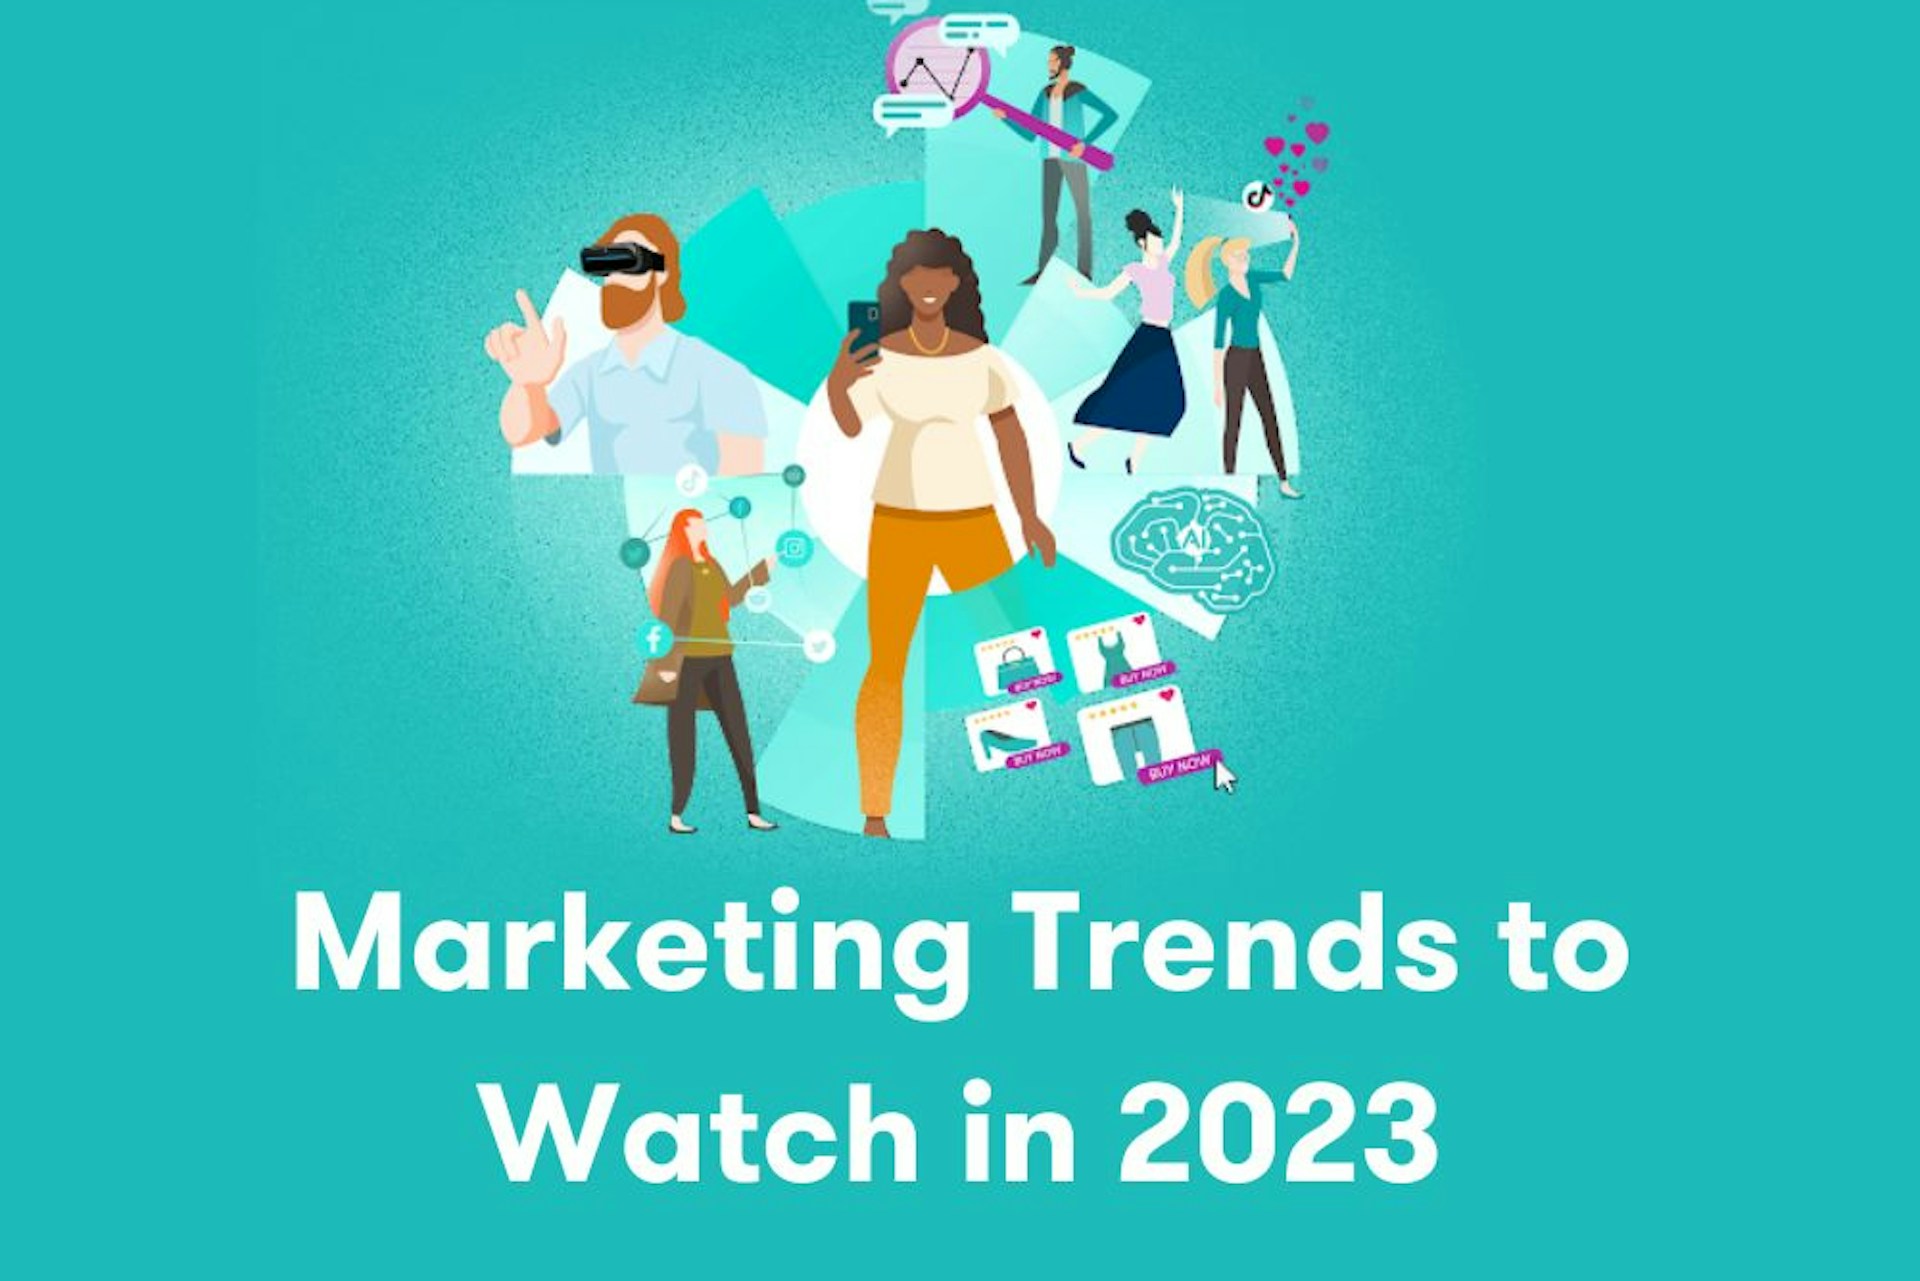 Marketing Trends to Watch in 2023